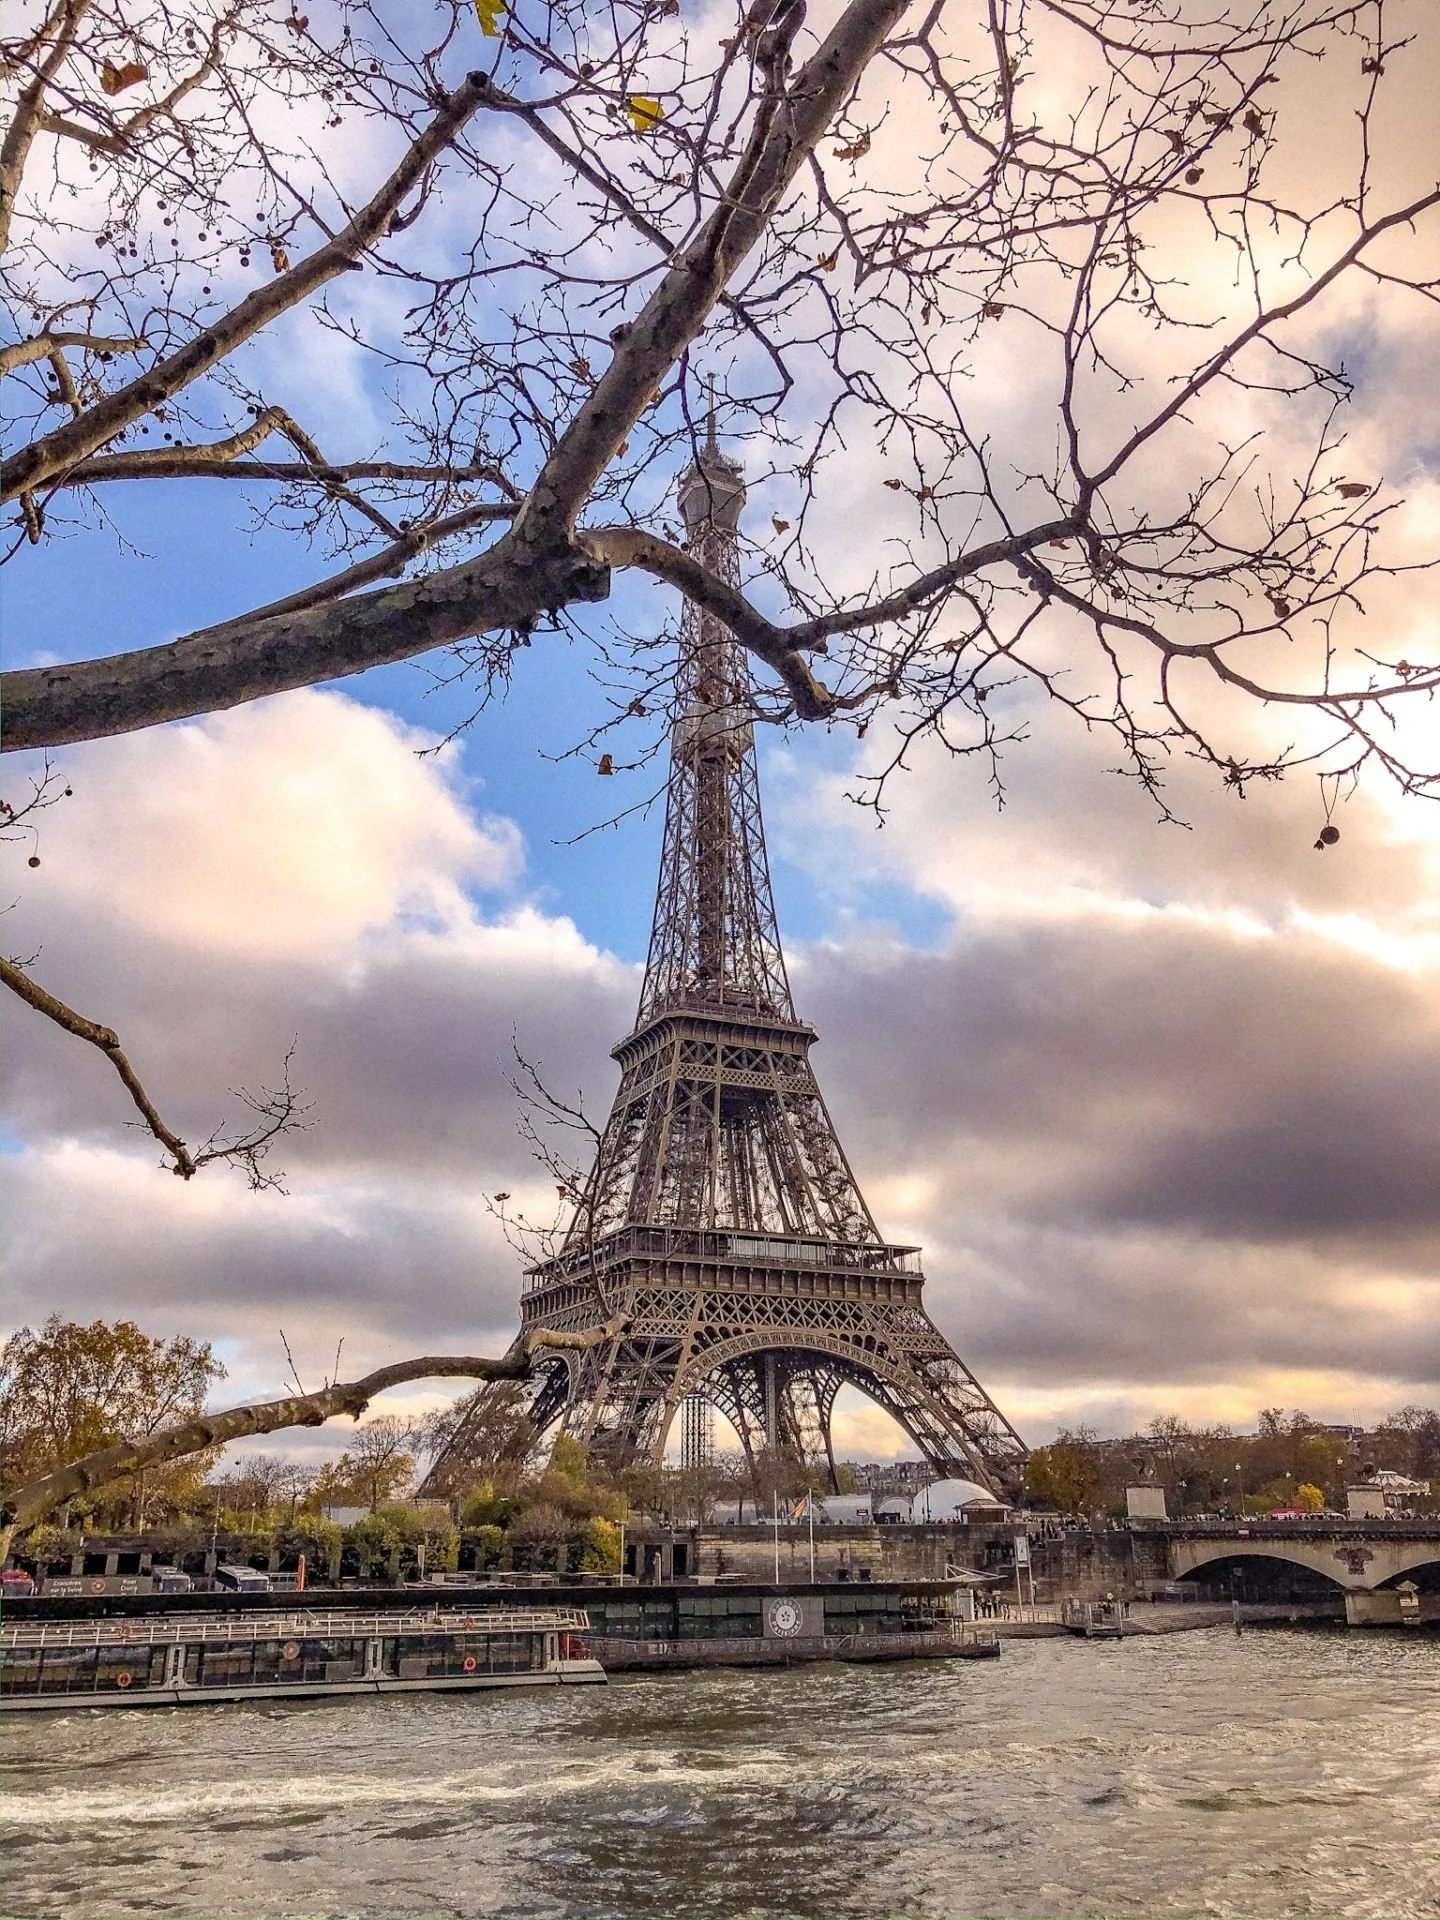 The Eiffel Tower in Paris from behind a tree